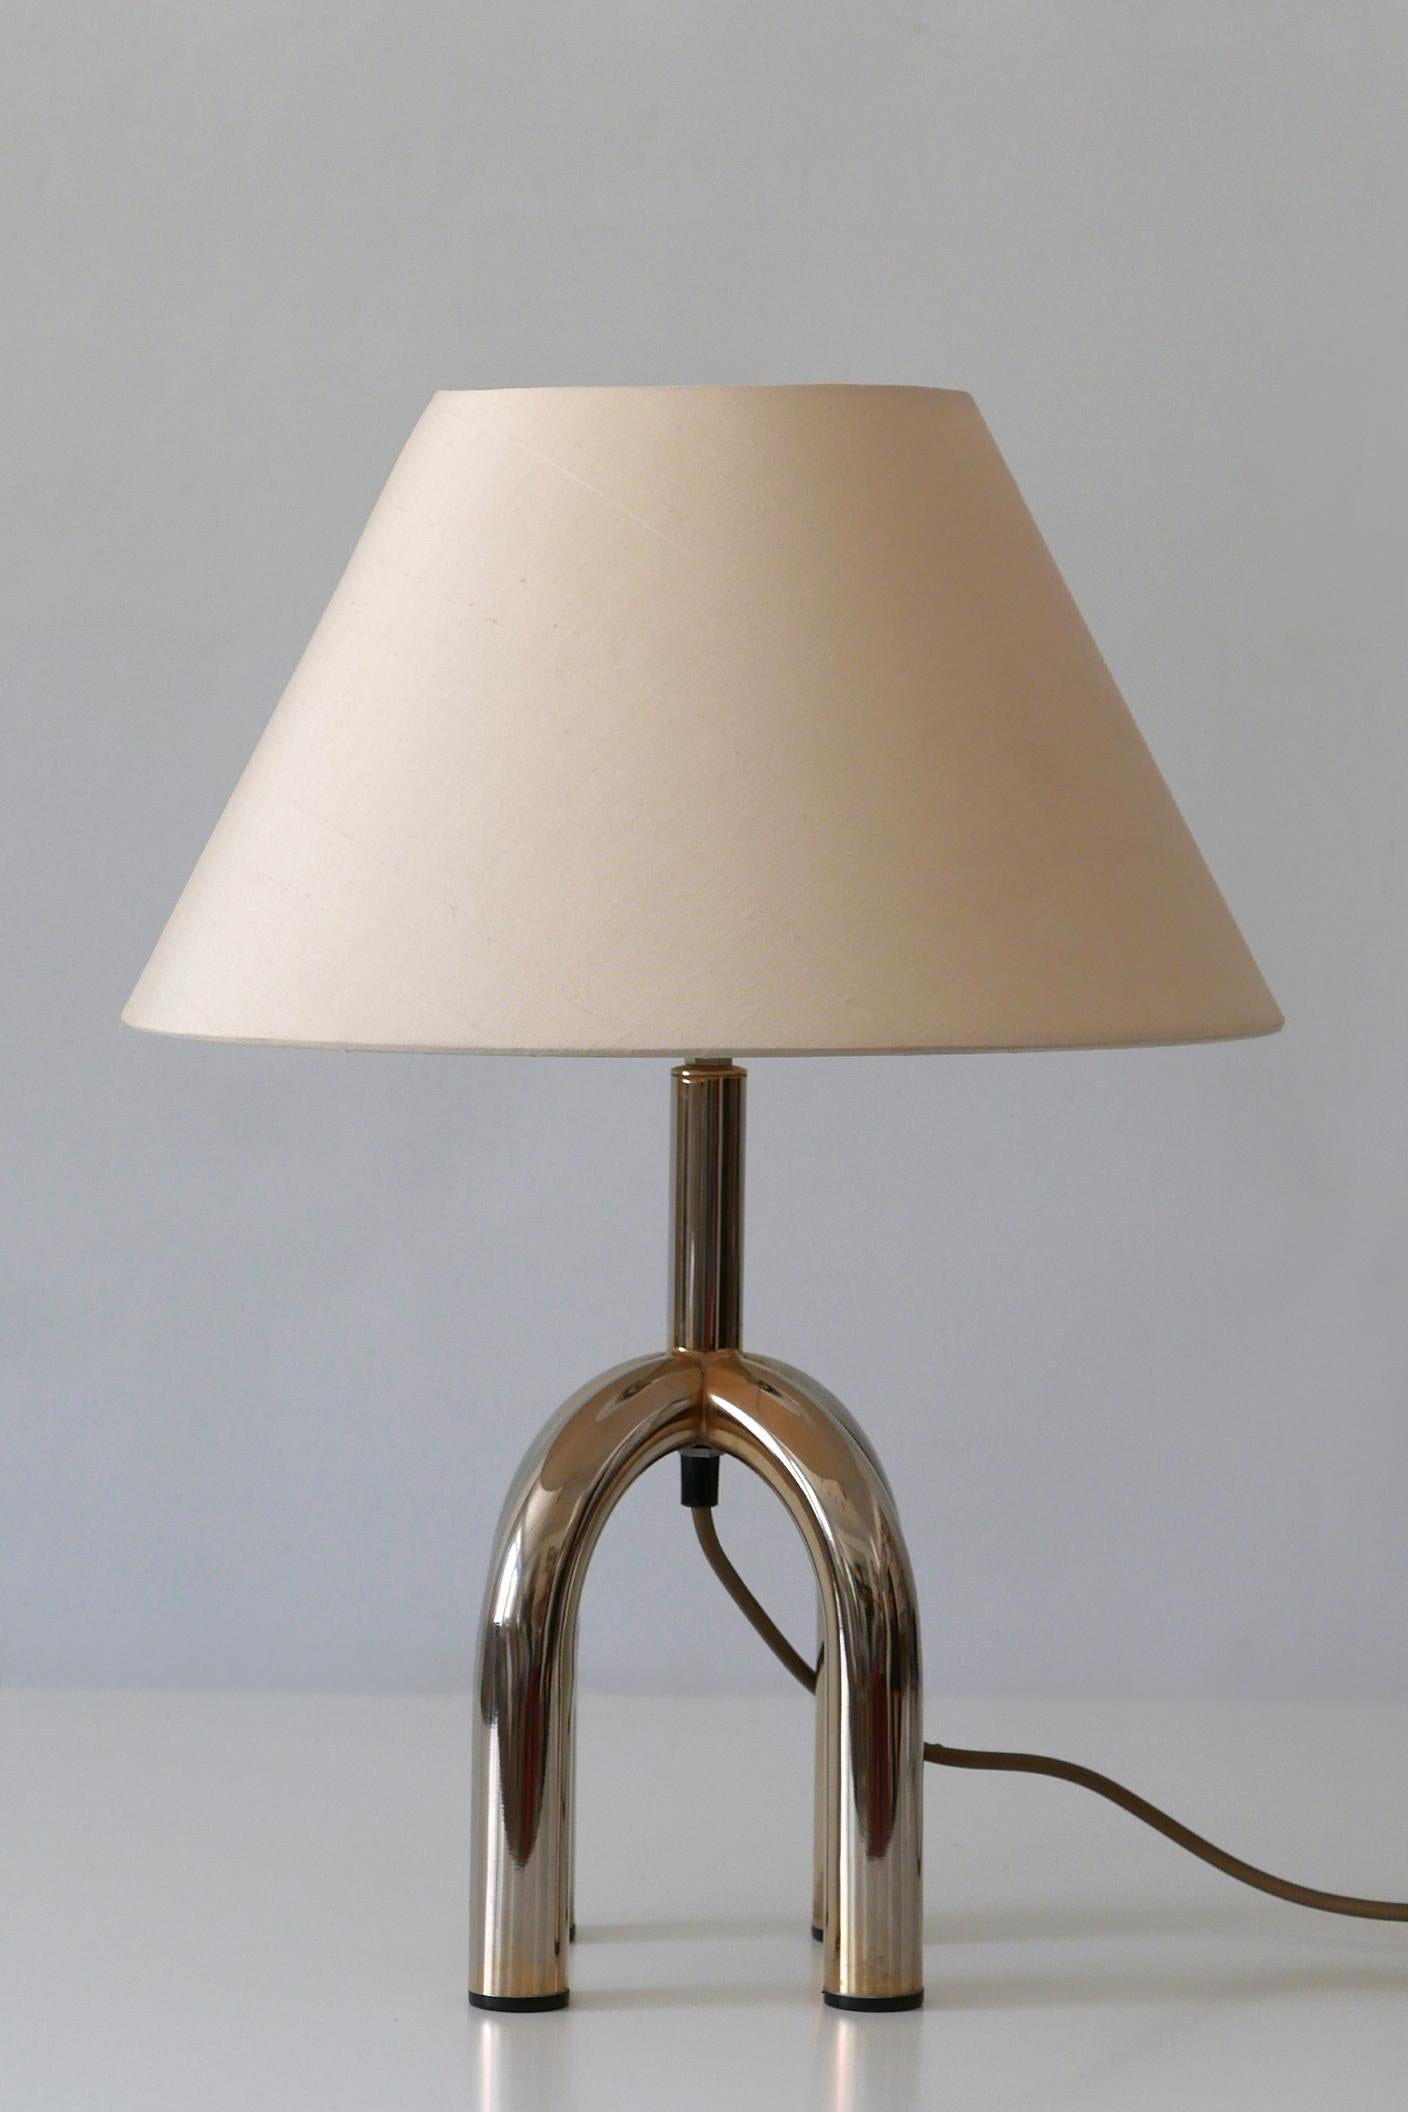 Set of Two Elegant Mid-Century Modern Table Lamps, 1970s, Germany 6